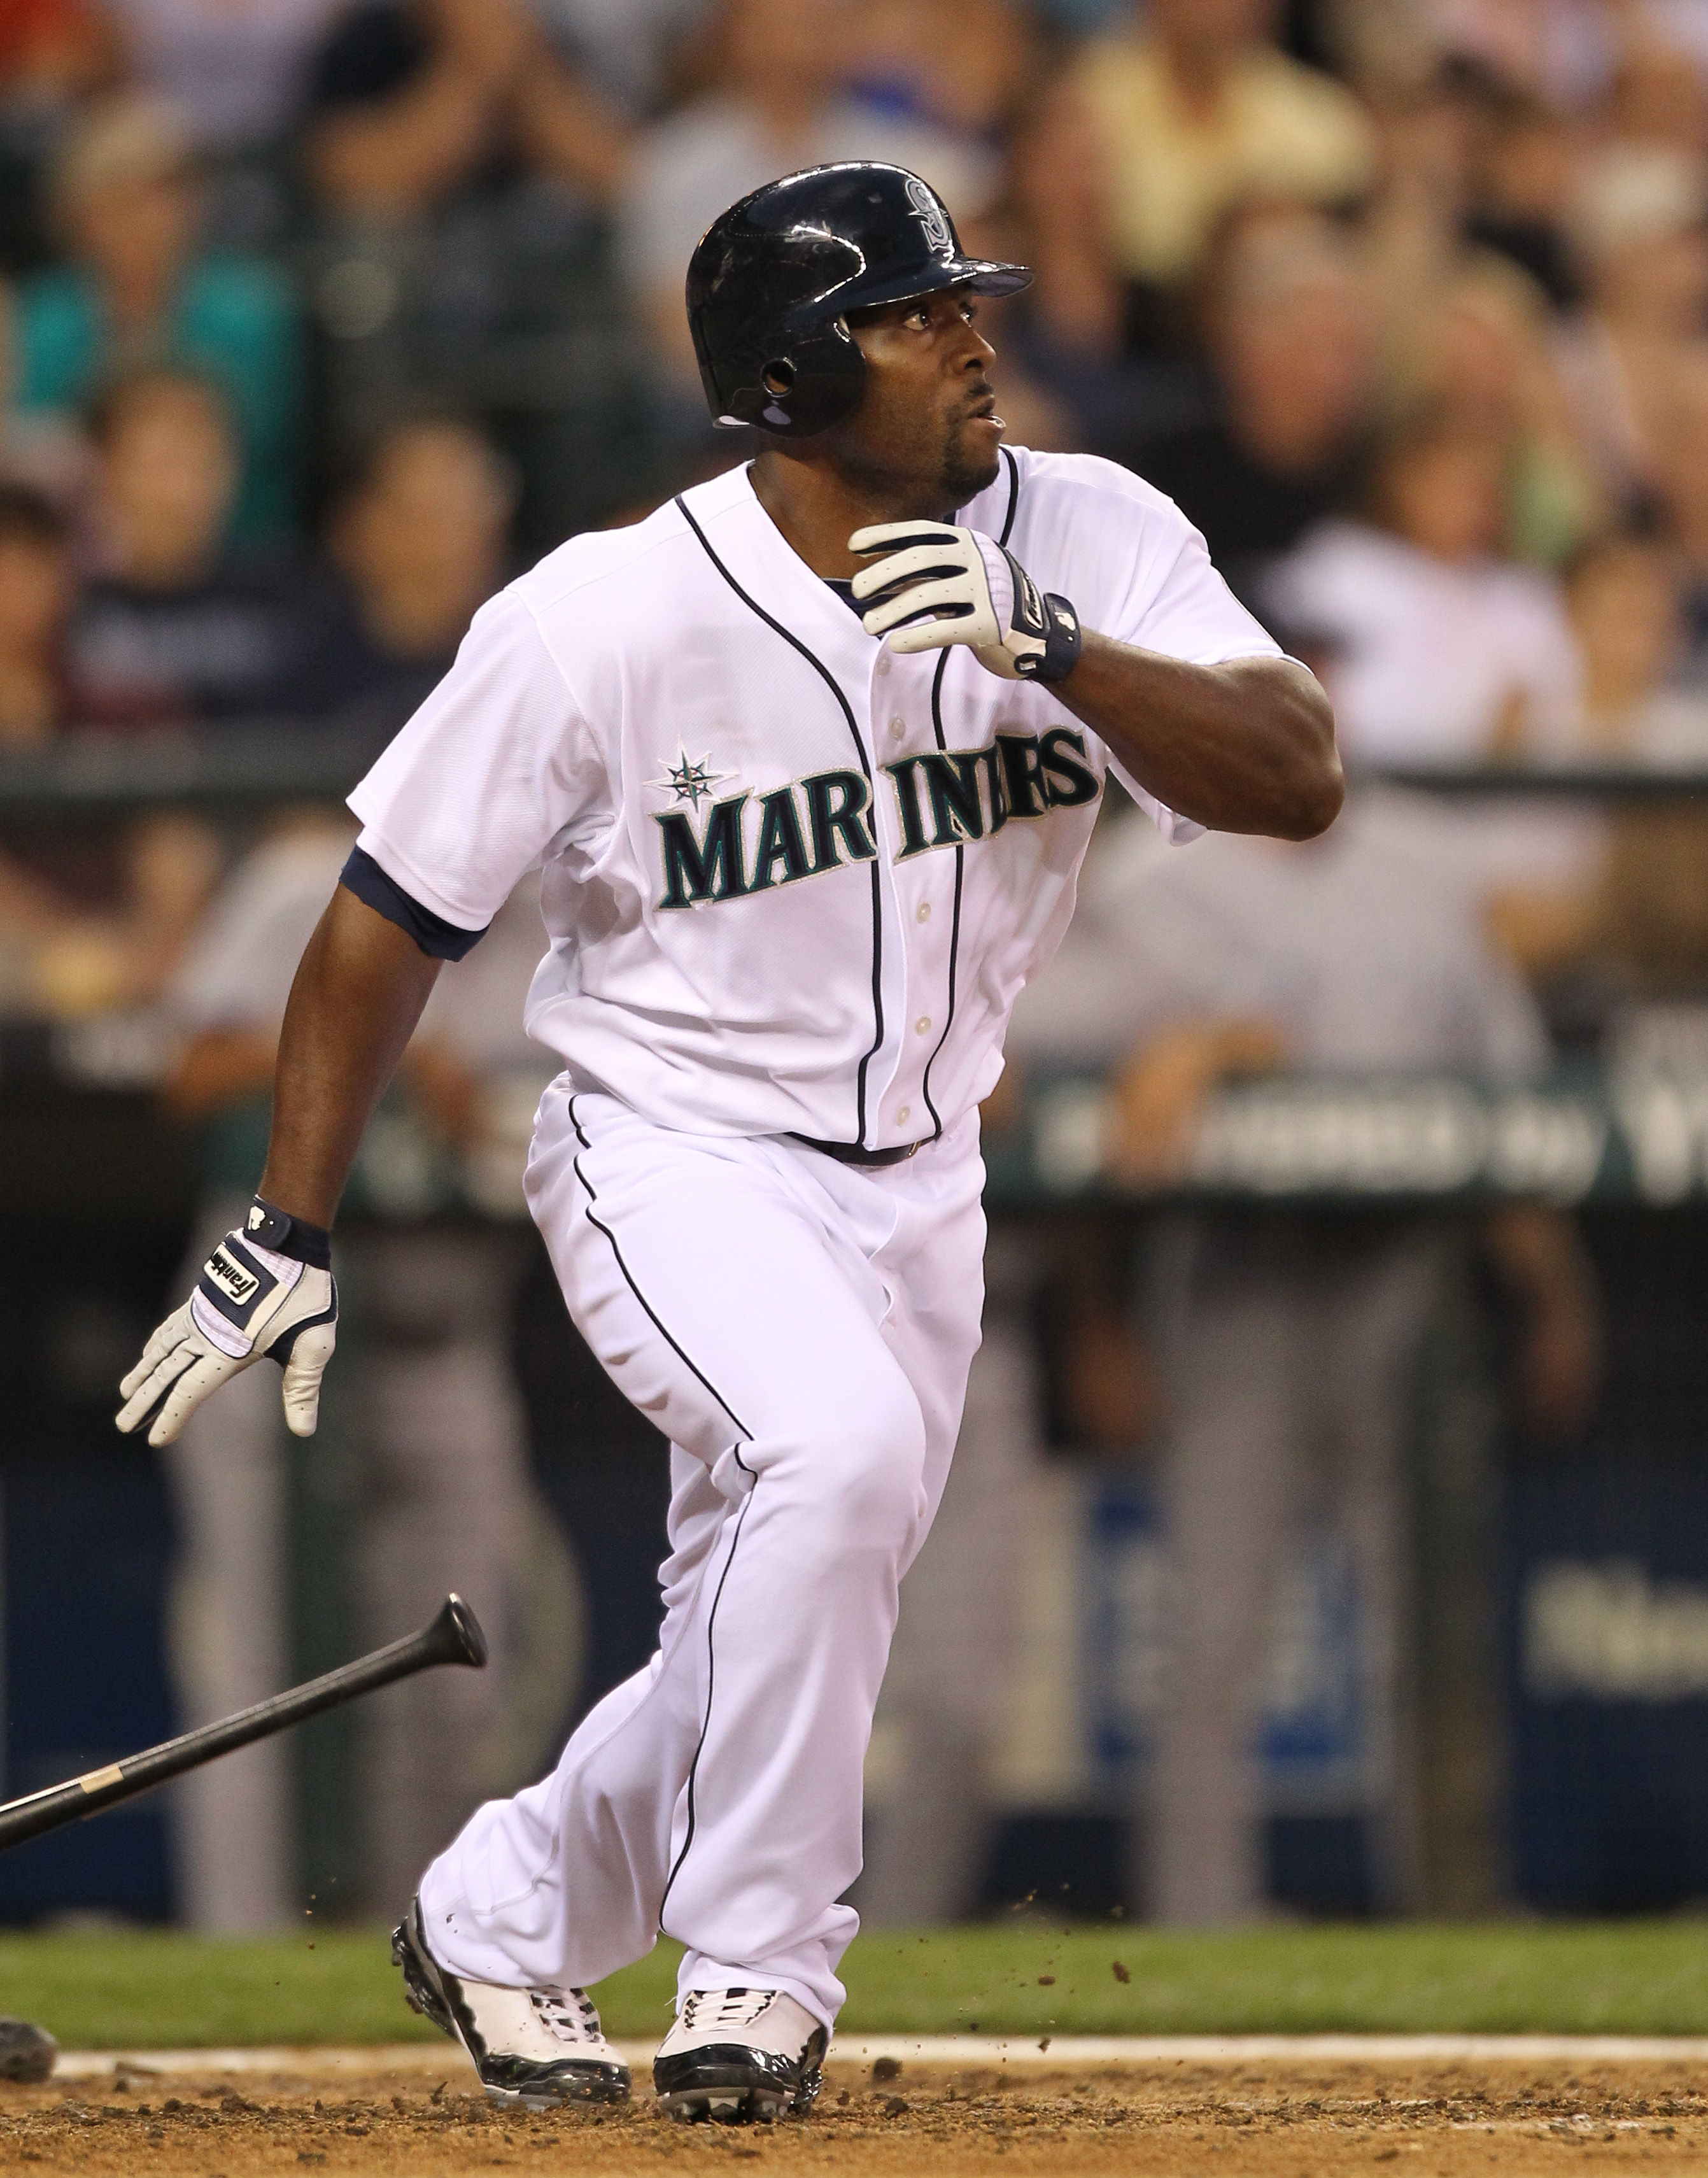 SEATTLE - JULY 10:  Milton Bradley #15 of the Seattle Mariners bats against the New York Yankees at Safeco Field on July 10, 2010 in Seattle, Washington. (Photo by Otto Greule Jr/Getty Images)